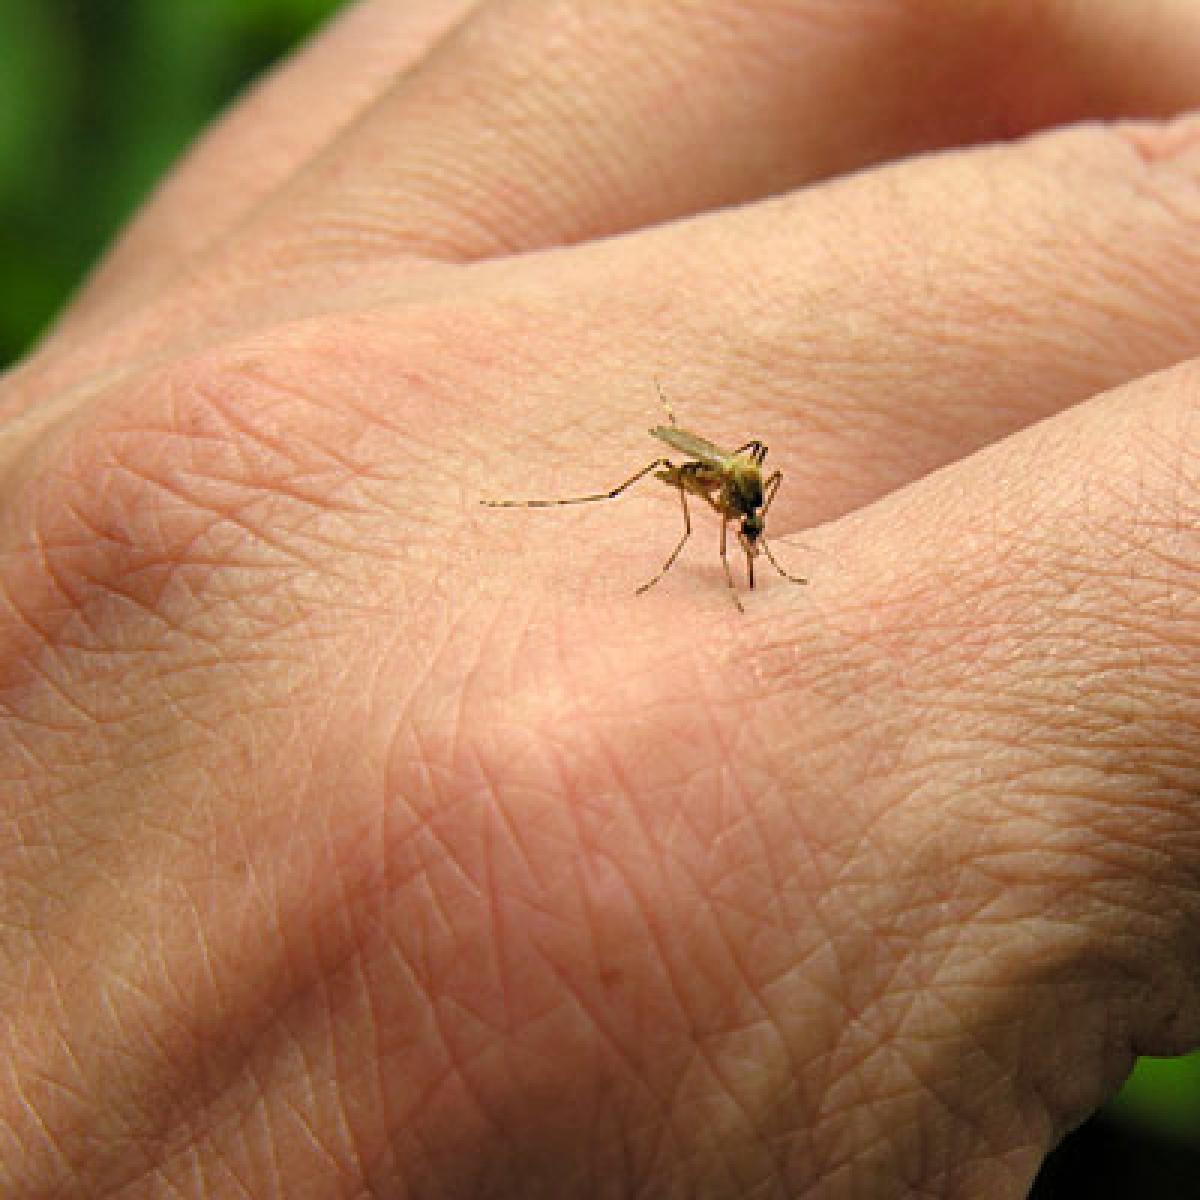 No protection for hostellers from mosquito bites